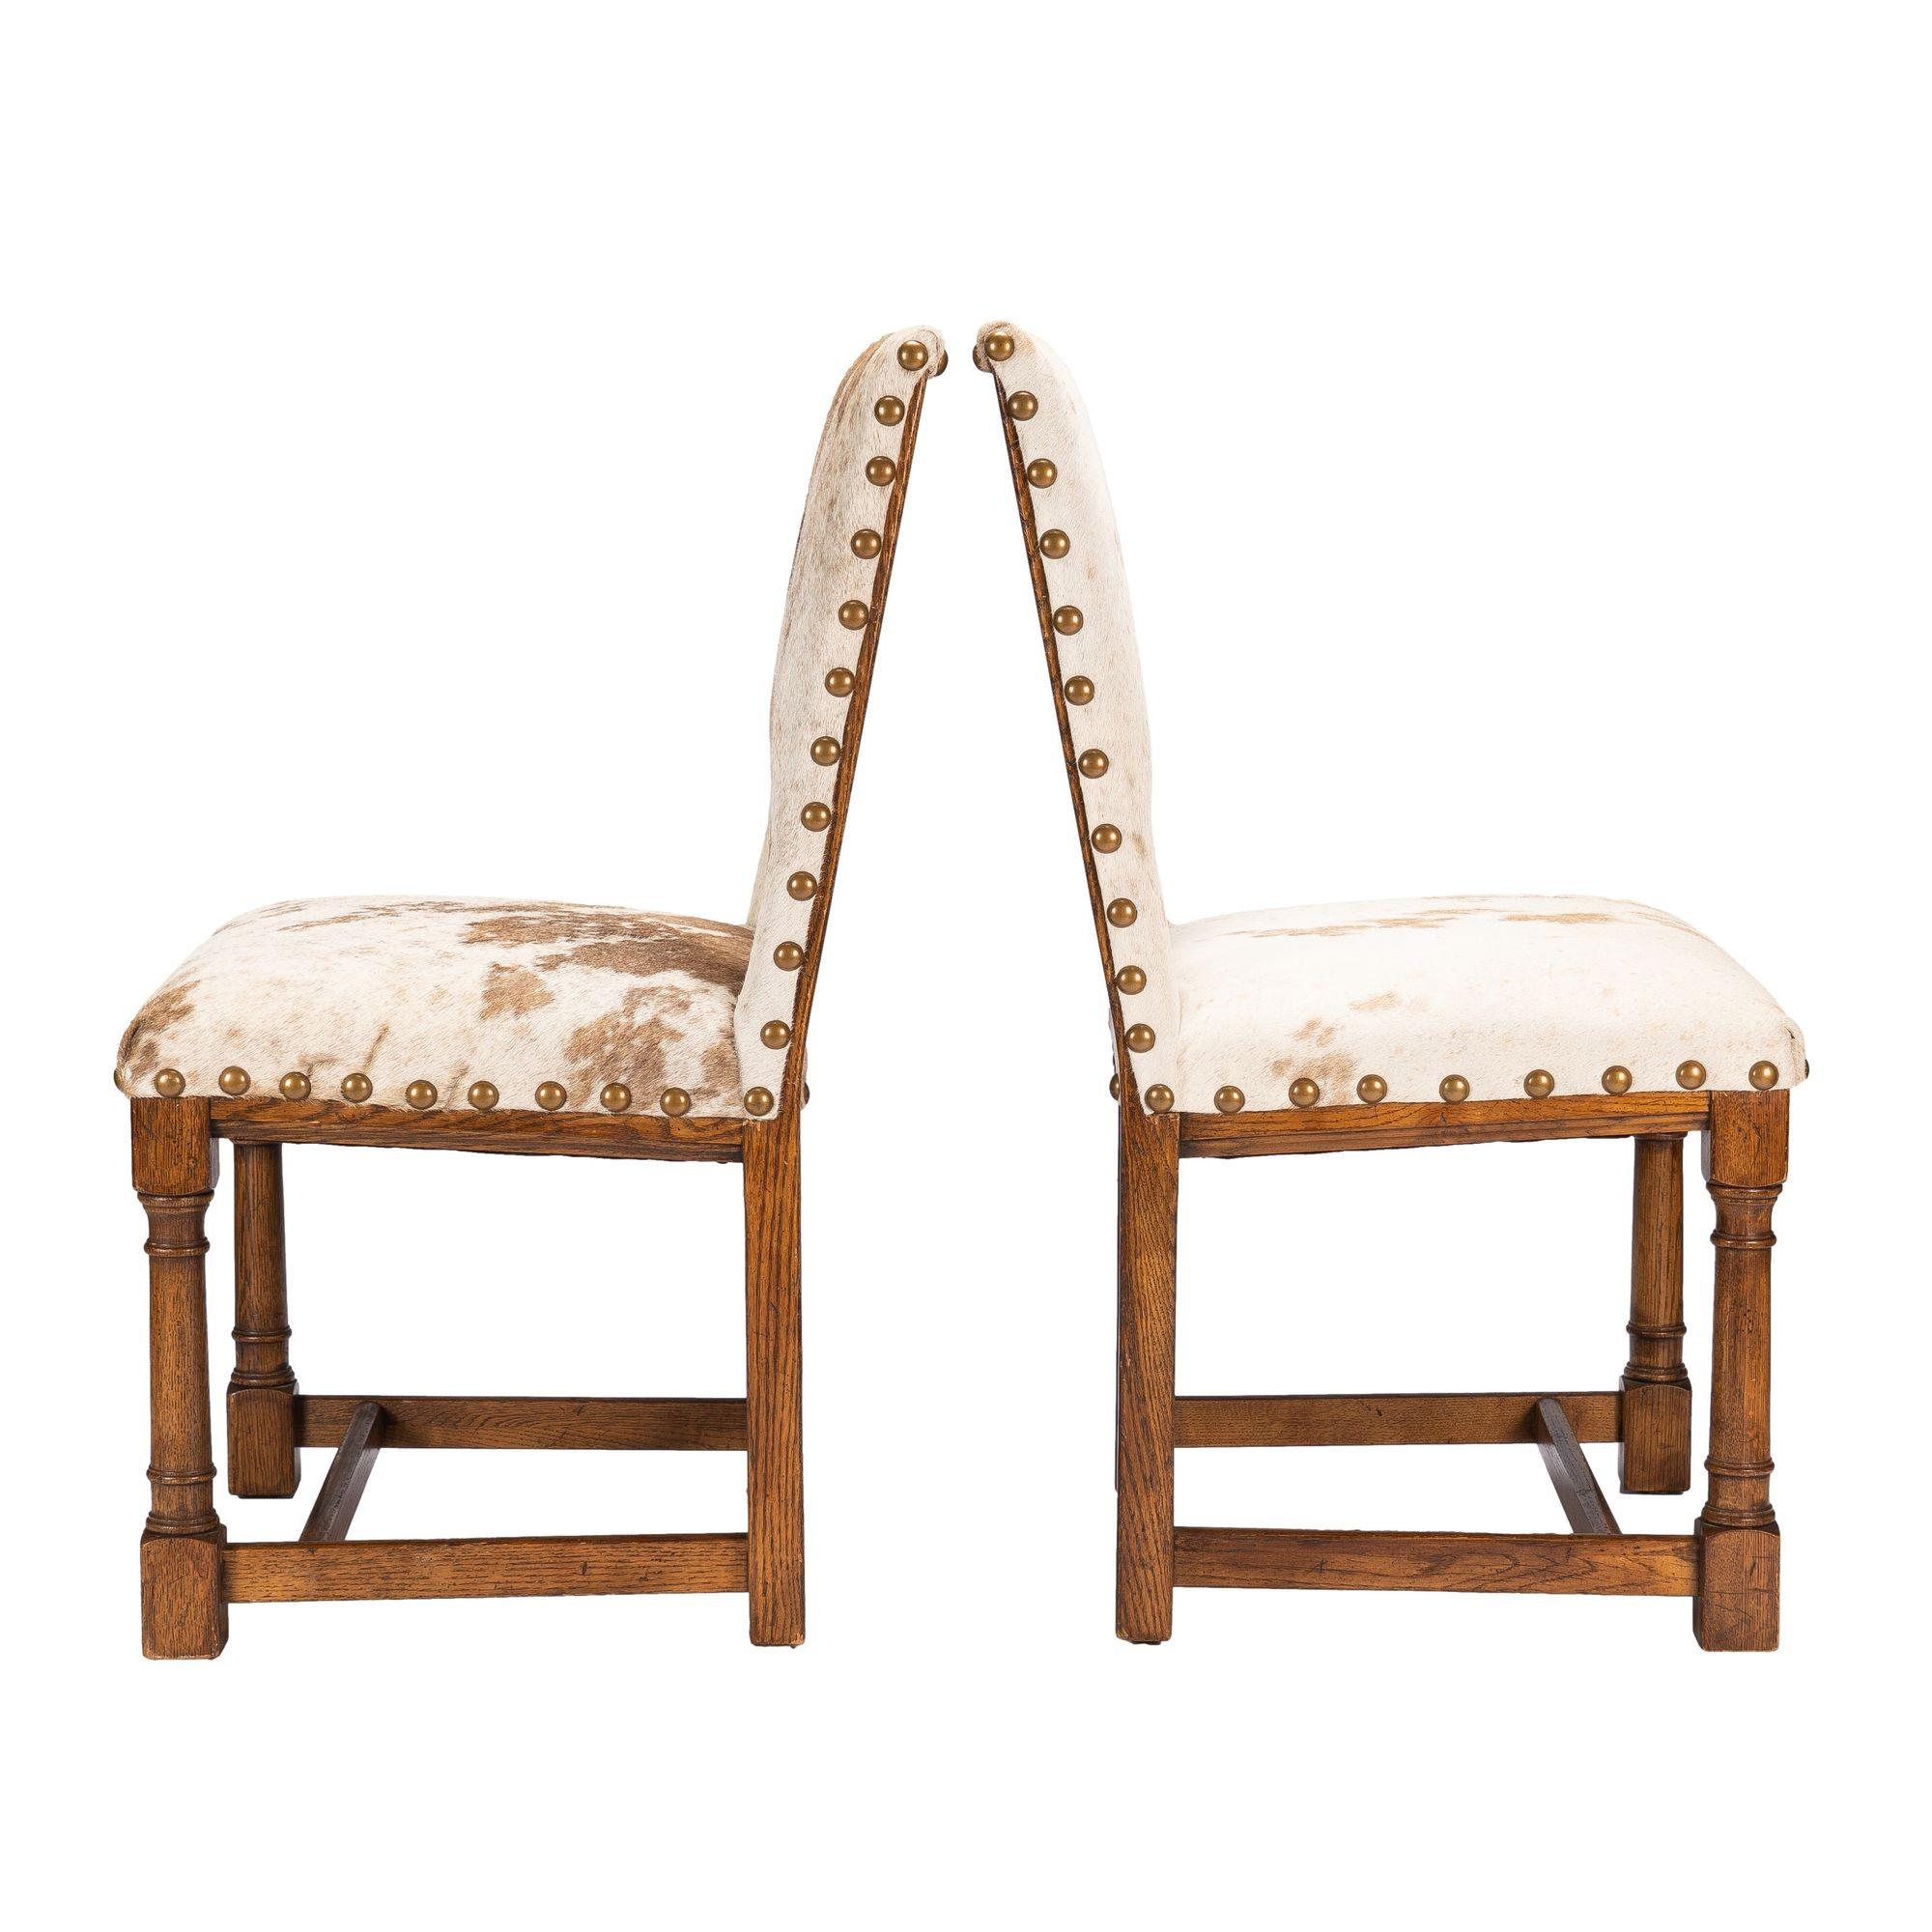 Pair of Jacobean style hair on hide oak side chairs, 1920-35 For Sale 2